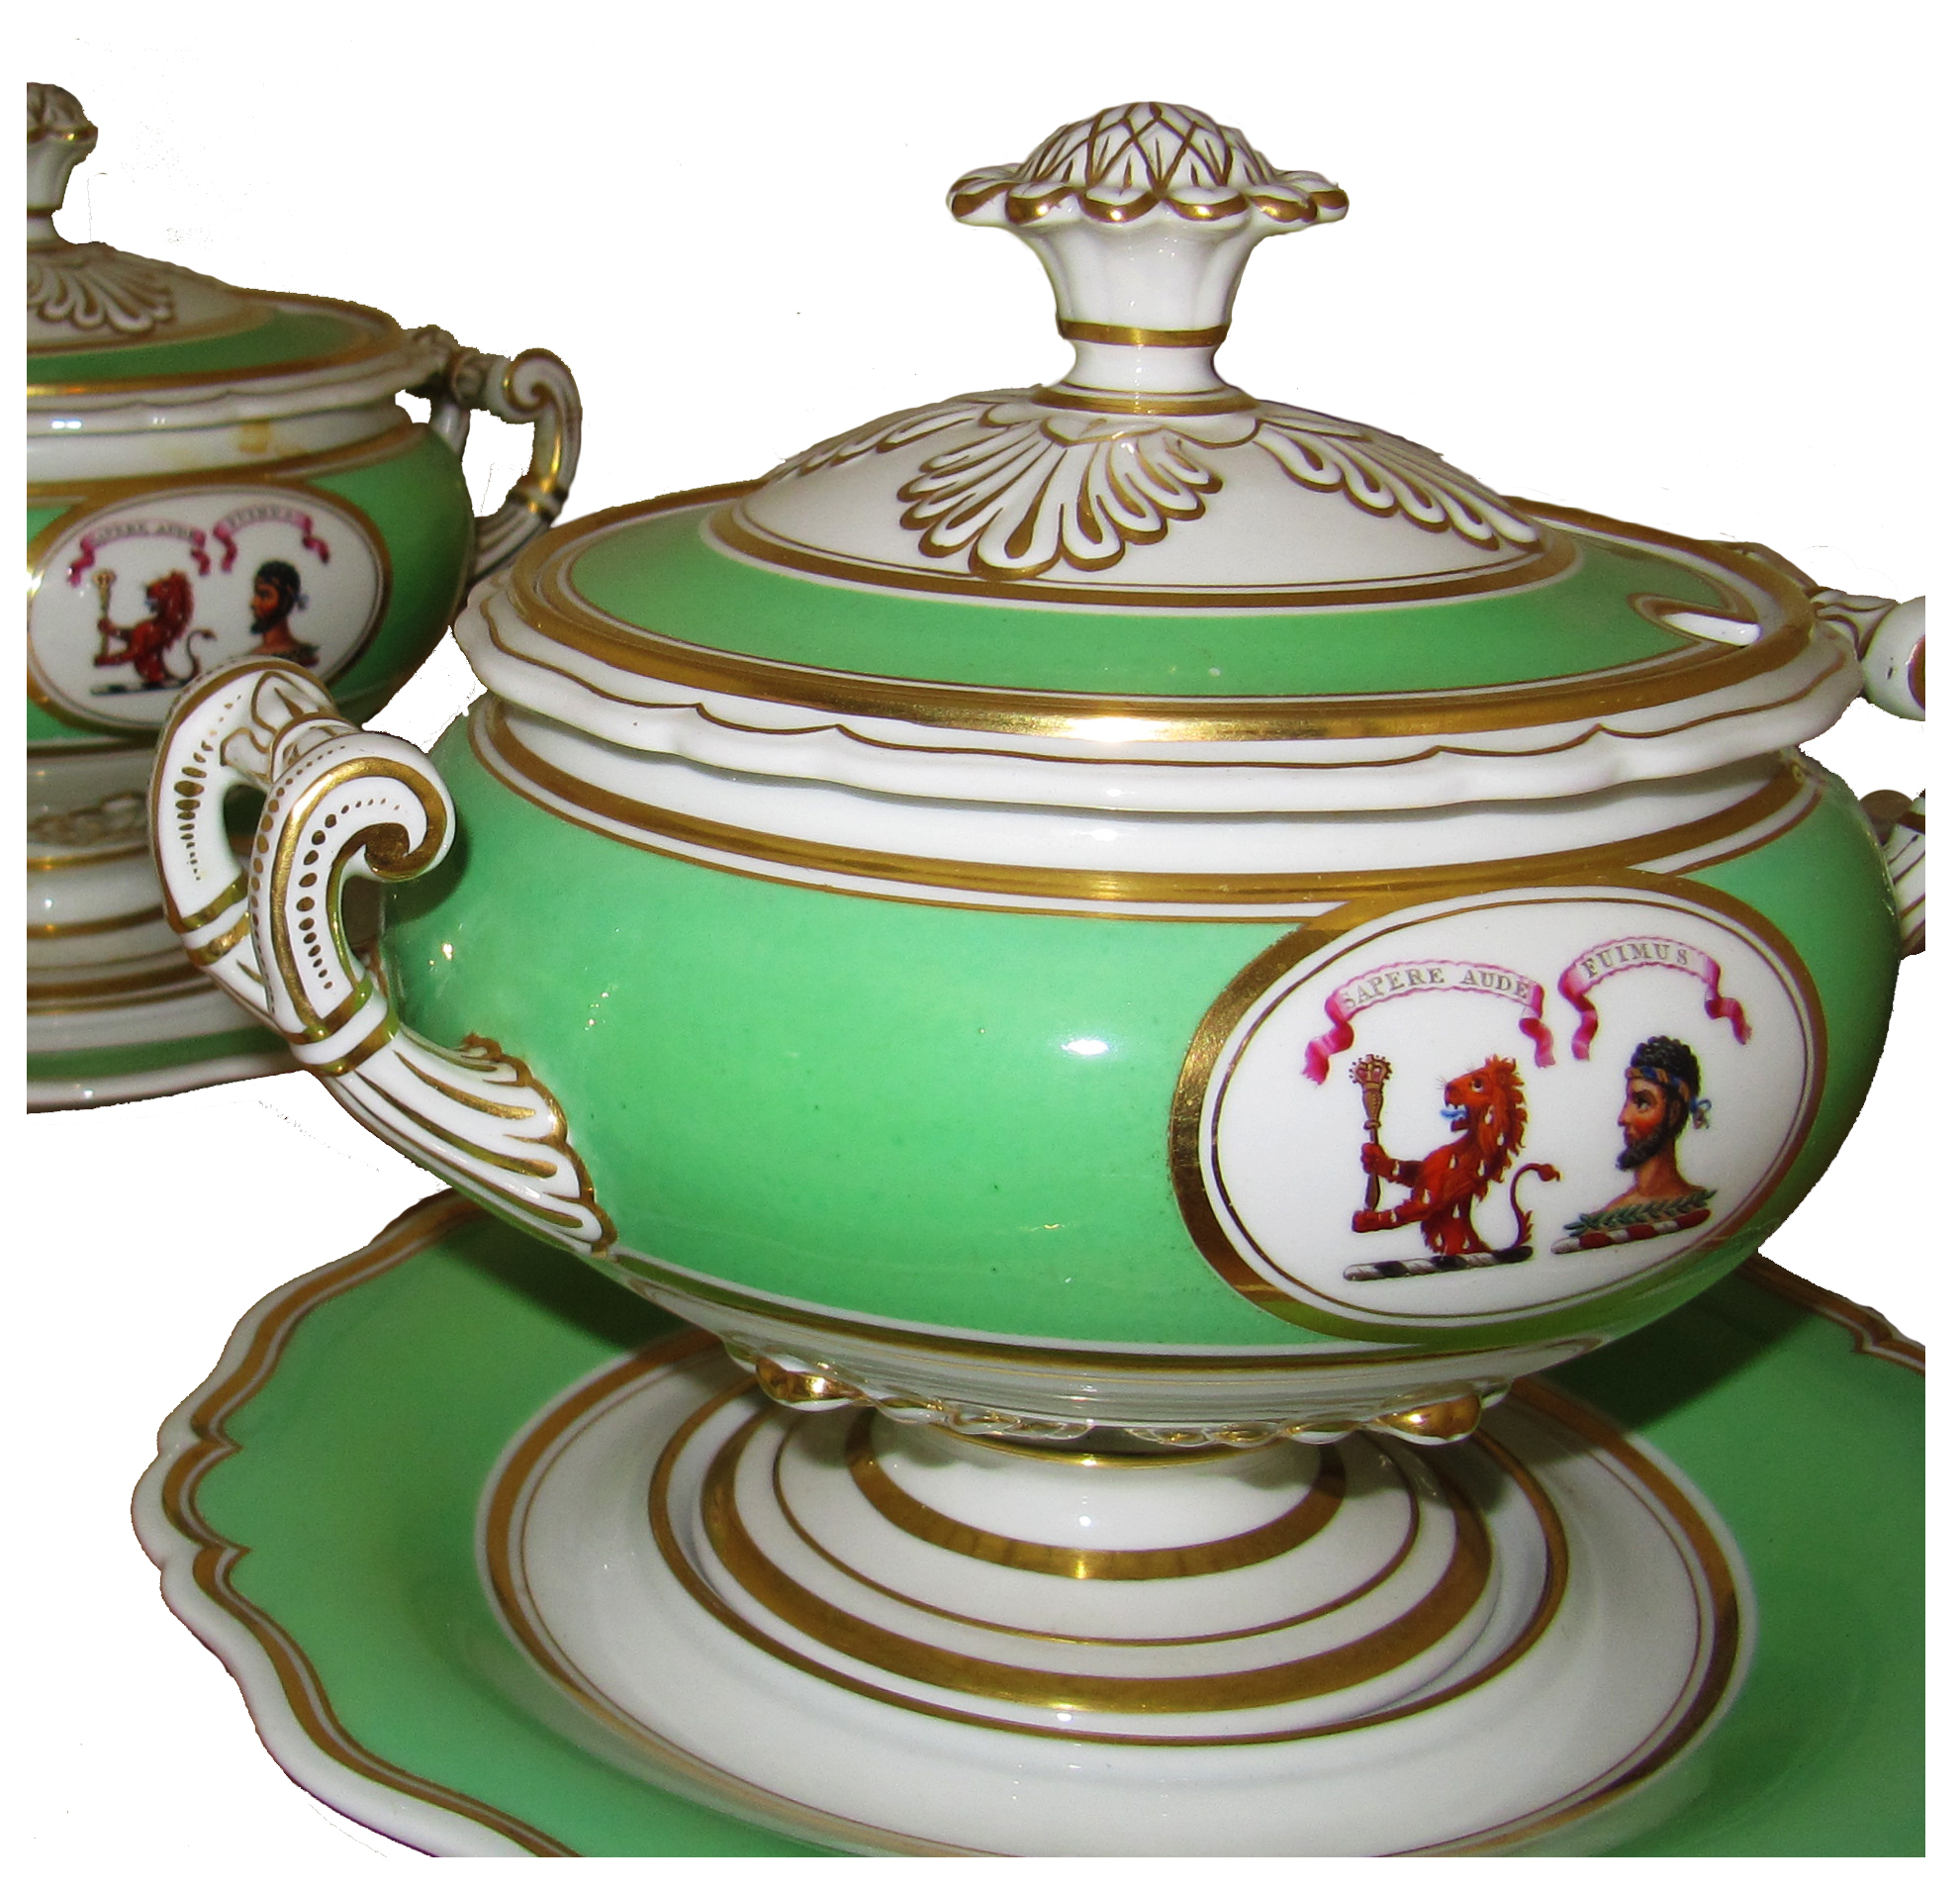 A Pair of Worcester (Flight, Barr & Barr) Porcelain Green-Ground Tureens, Covers and Stands